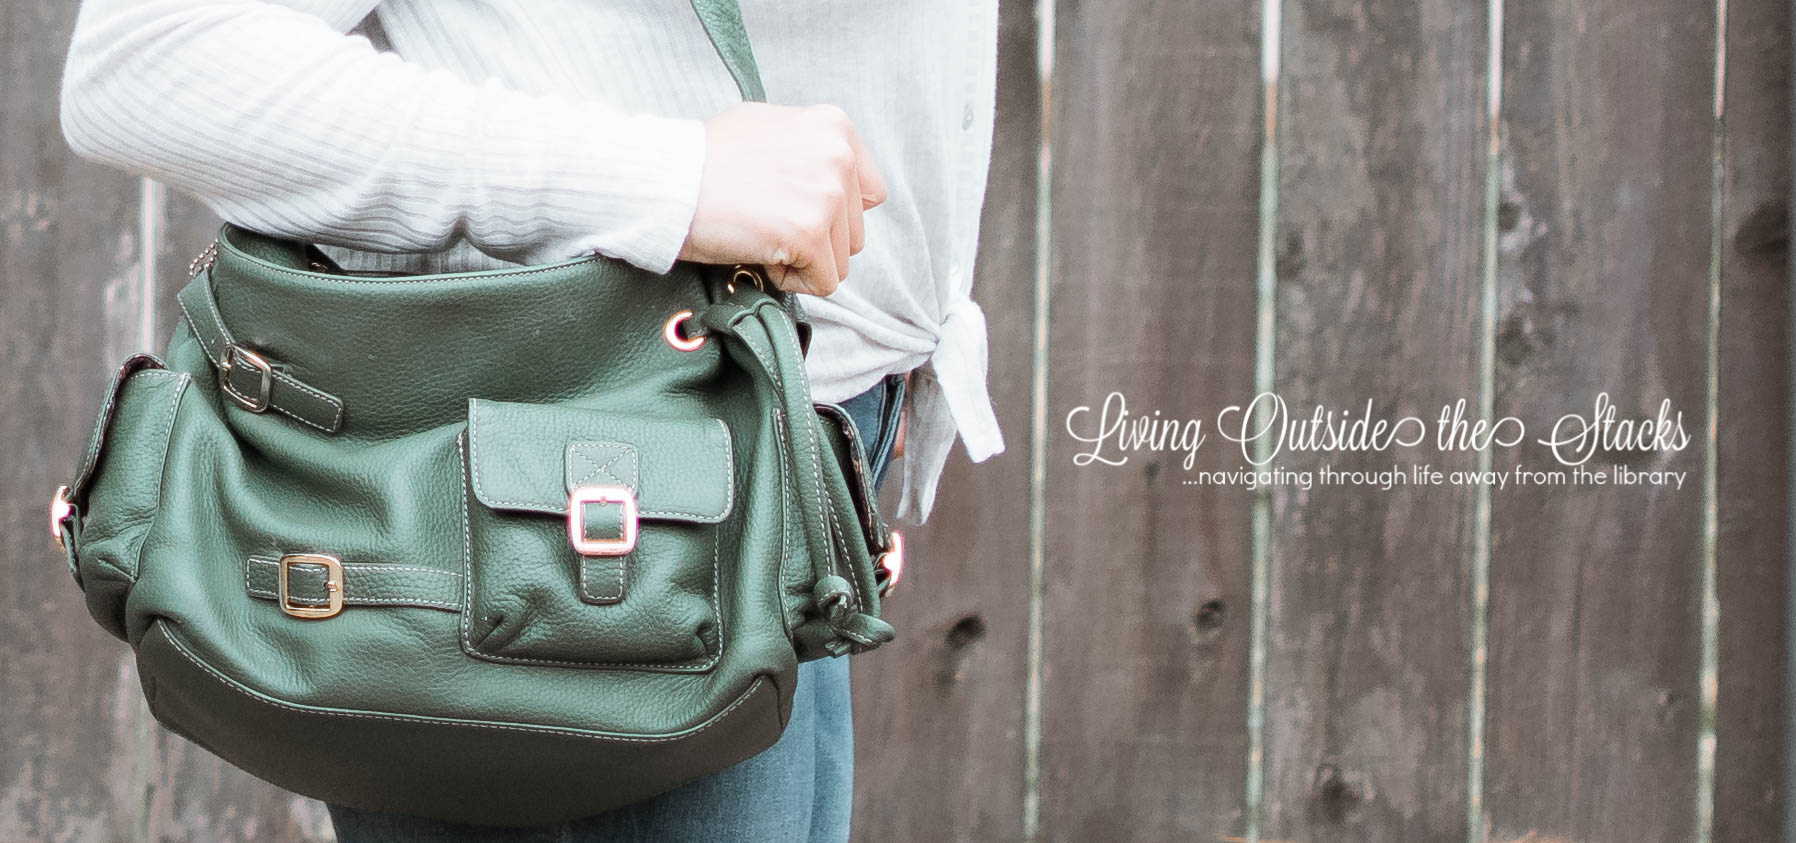 Gray Sweater Skinny Jeans Sandals and Green Bag {living outside the stacks}